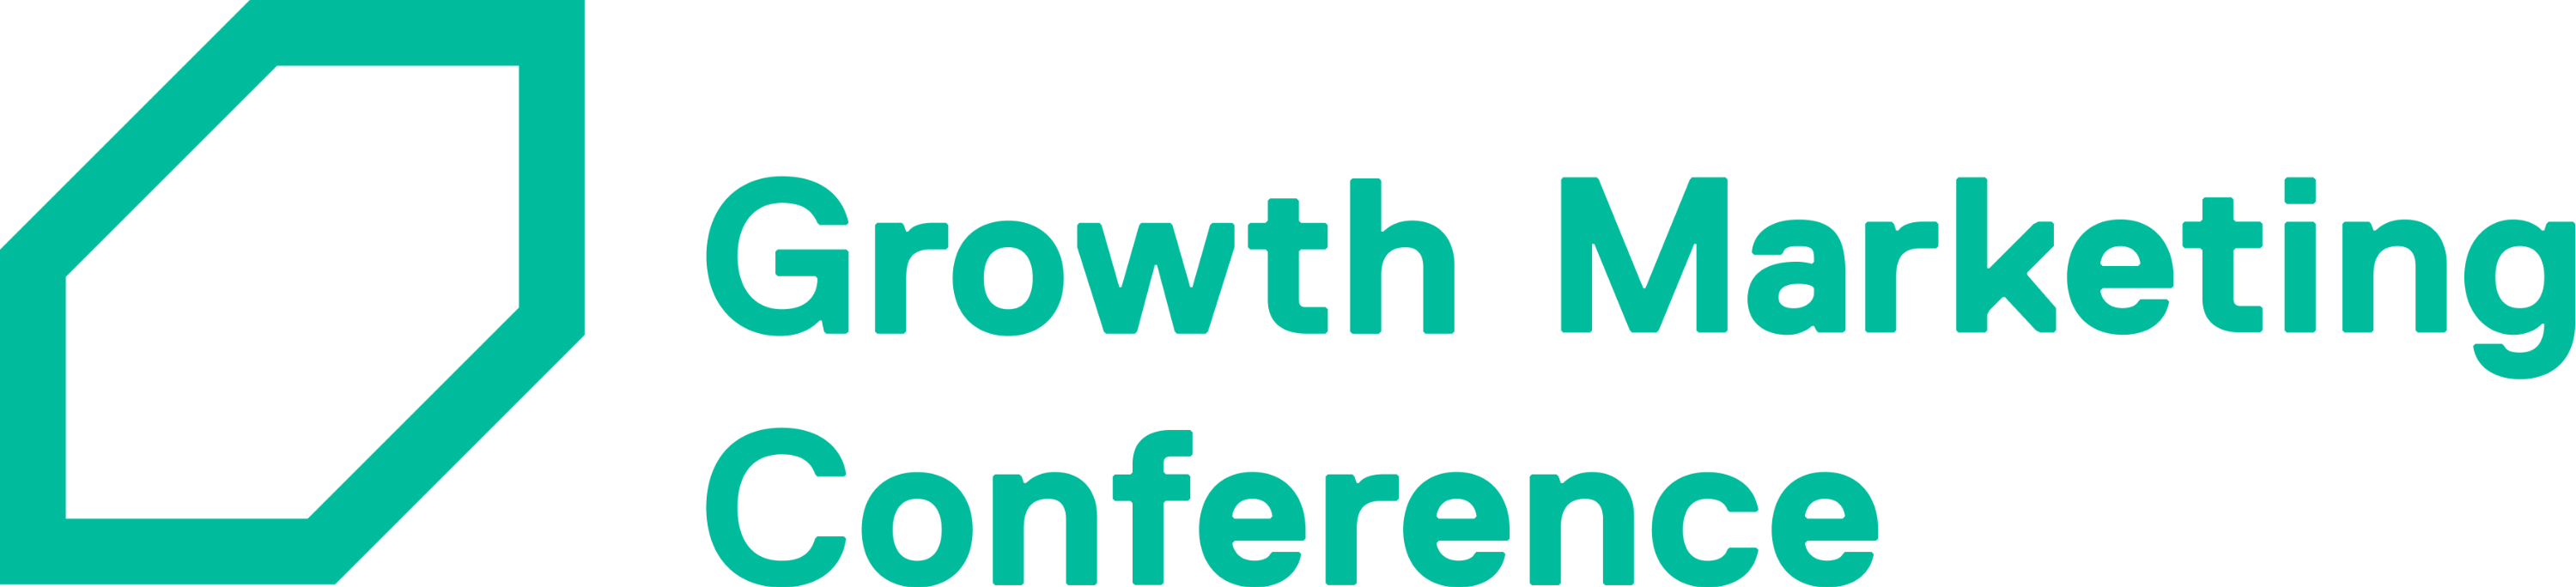 Growth marketing conferences